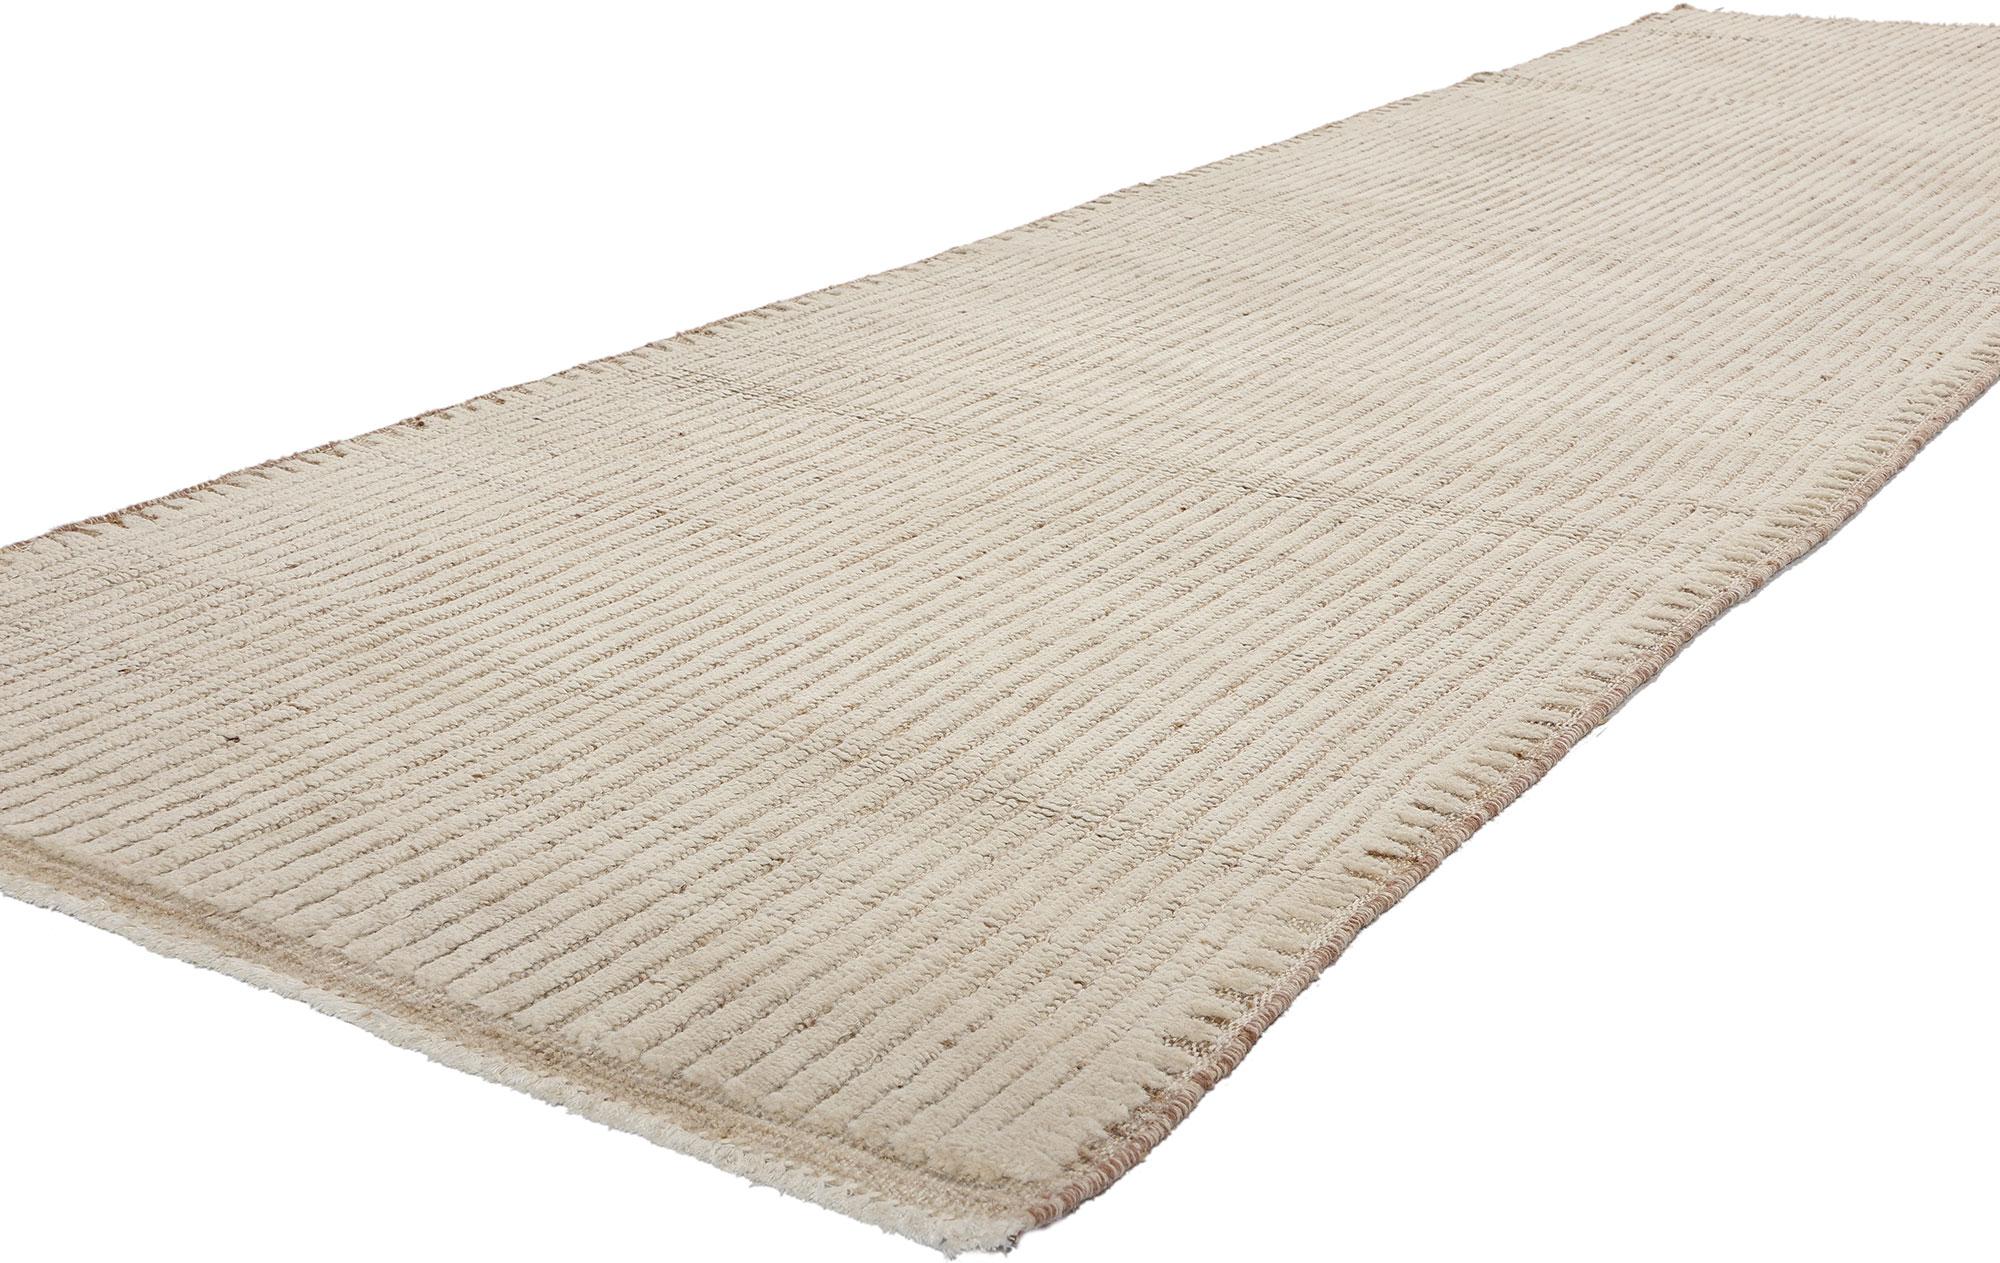 81106 Organic Modern Striations Moroccan Rug, 03'04 x 12'04. In this hand-knotted wool Organic Modern Moroccan rug runner, the robust character of Brutalism seamlessly intertwines with the serene simplicity of Japanese minimalism. Crafted with